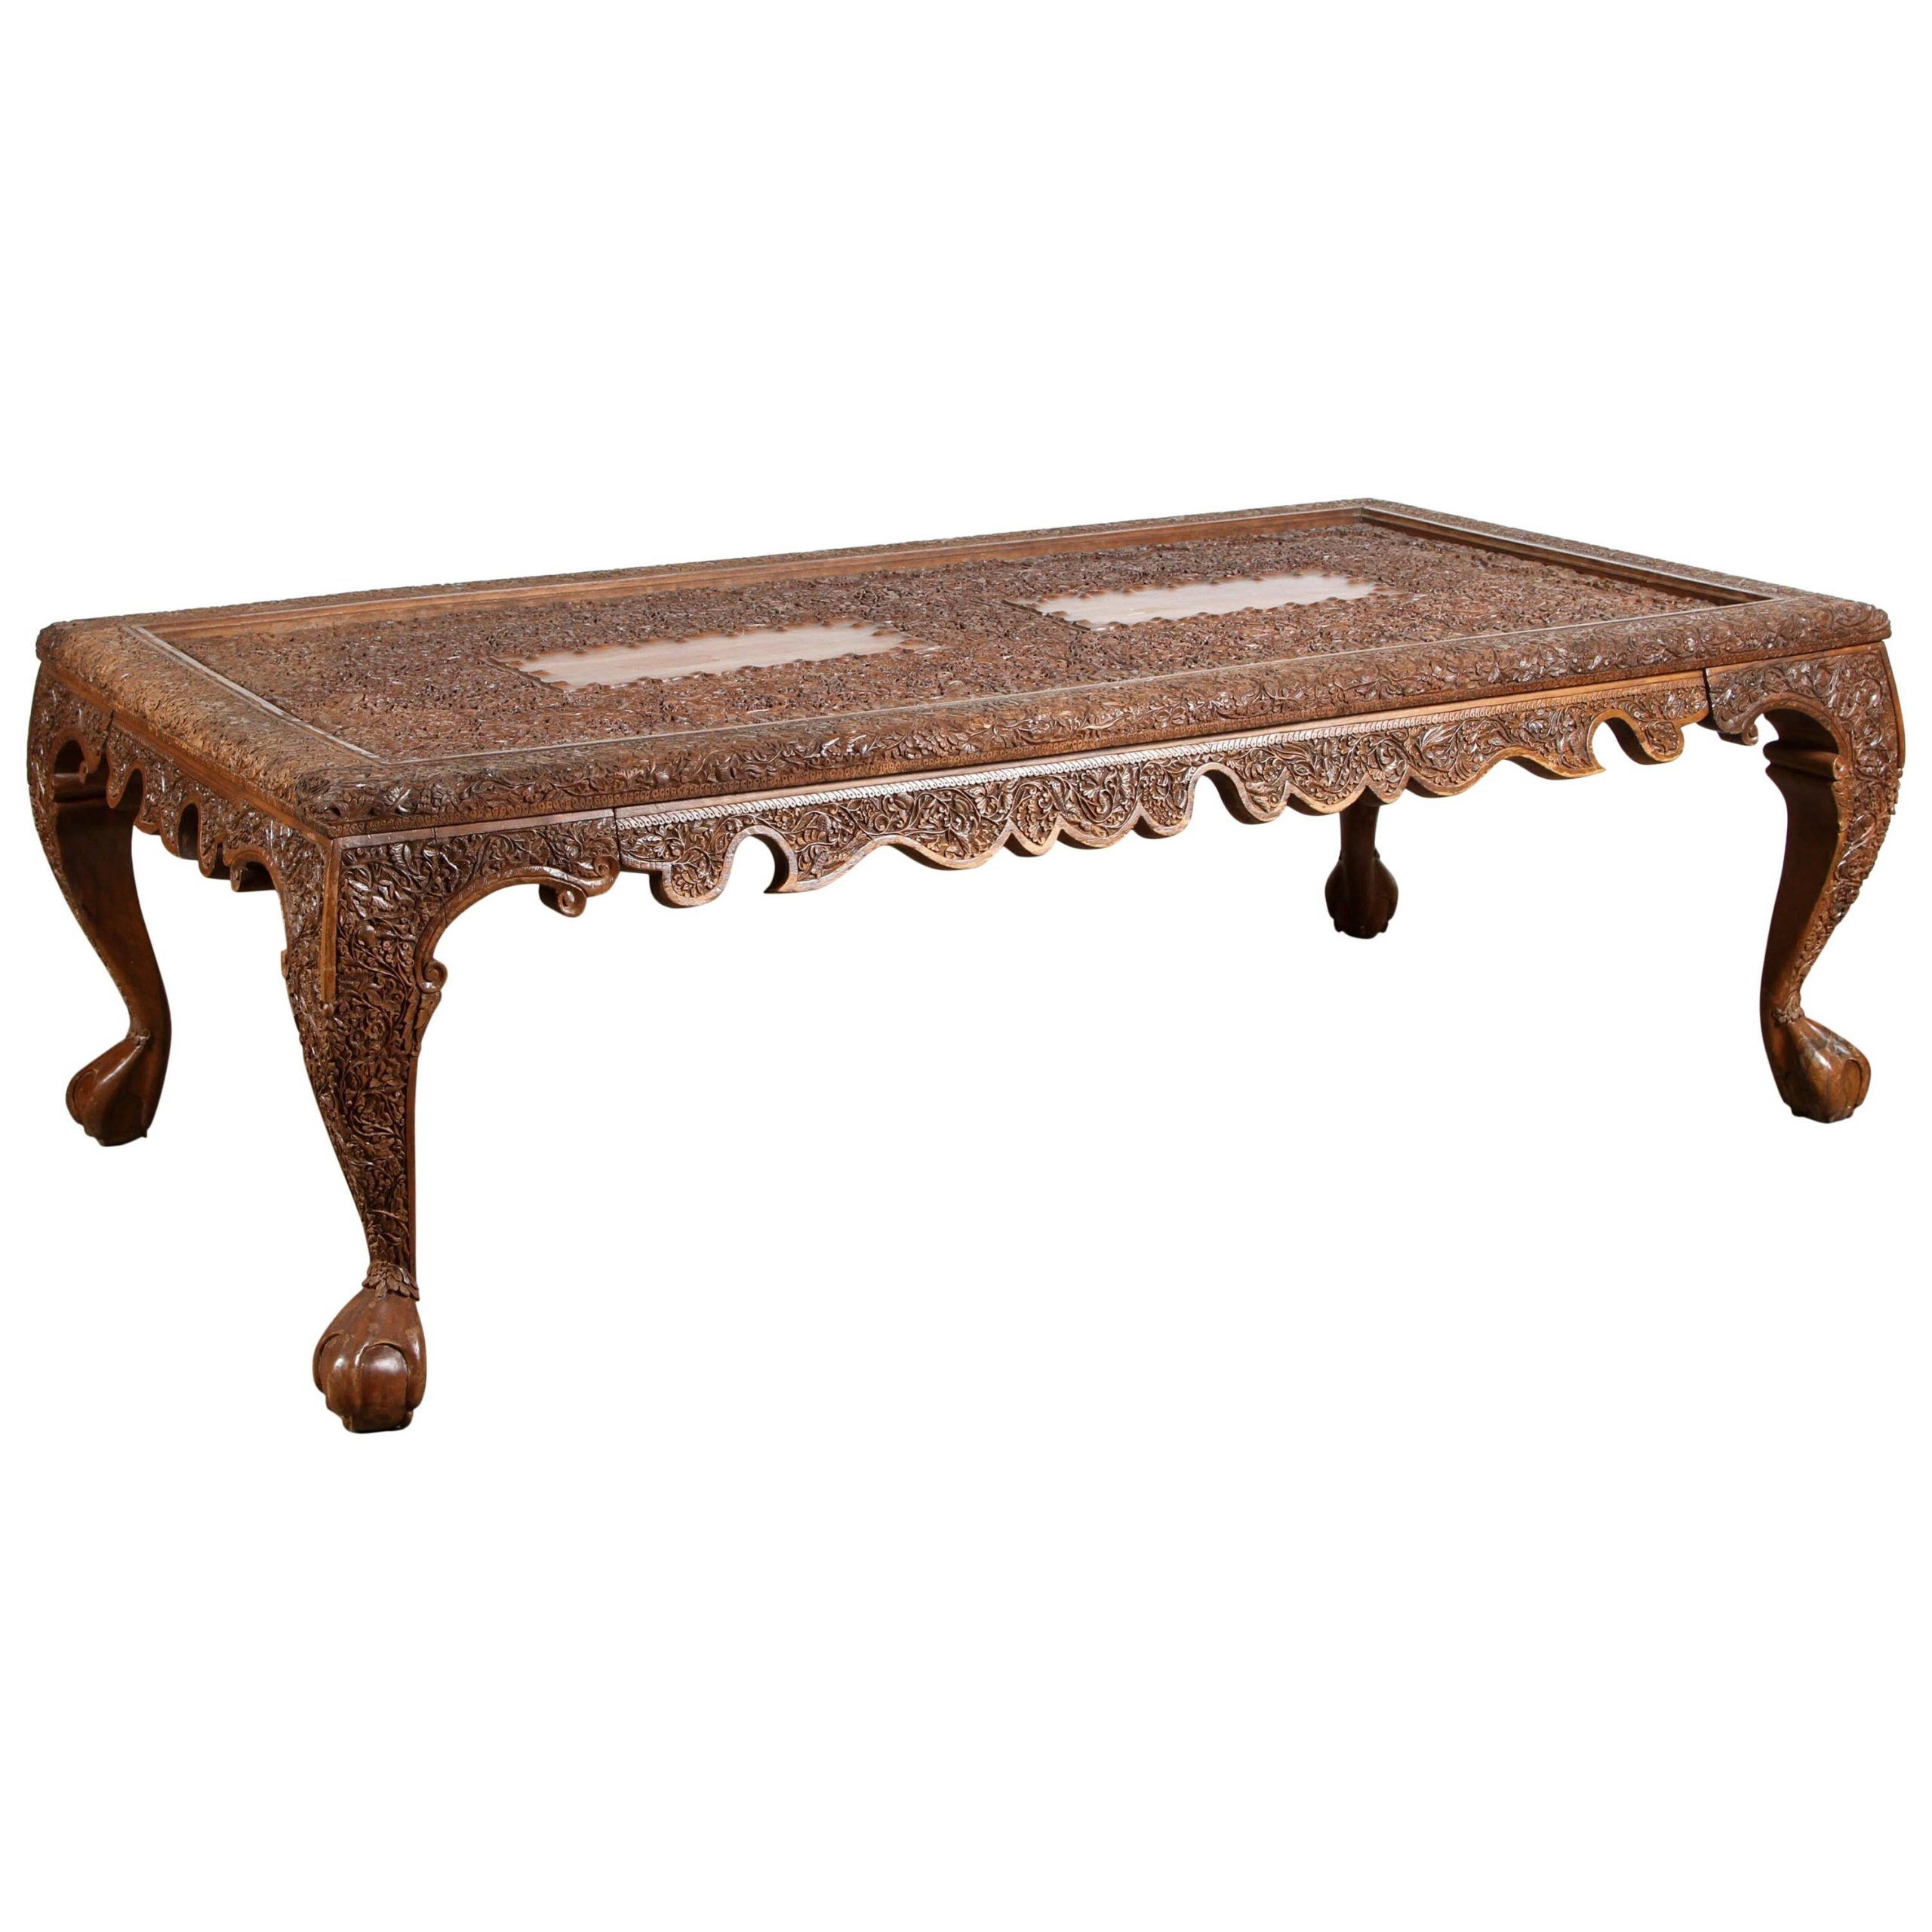 Asian Wood Hand Crafted Coffee Table For Sale At 1stdibs Intended For Wooden Hand Carved Coffee Tables (View 7 of 20)